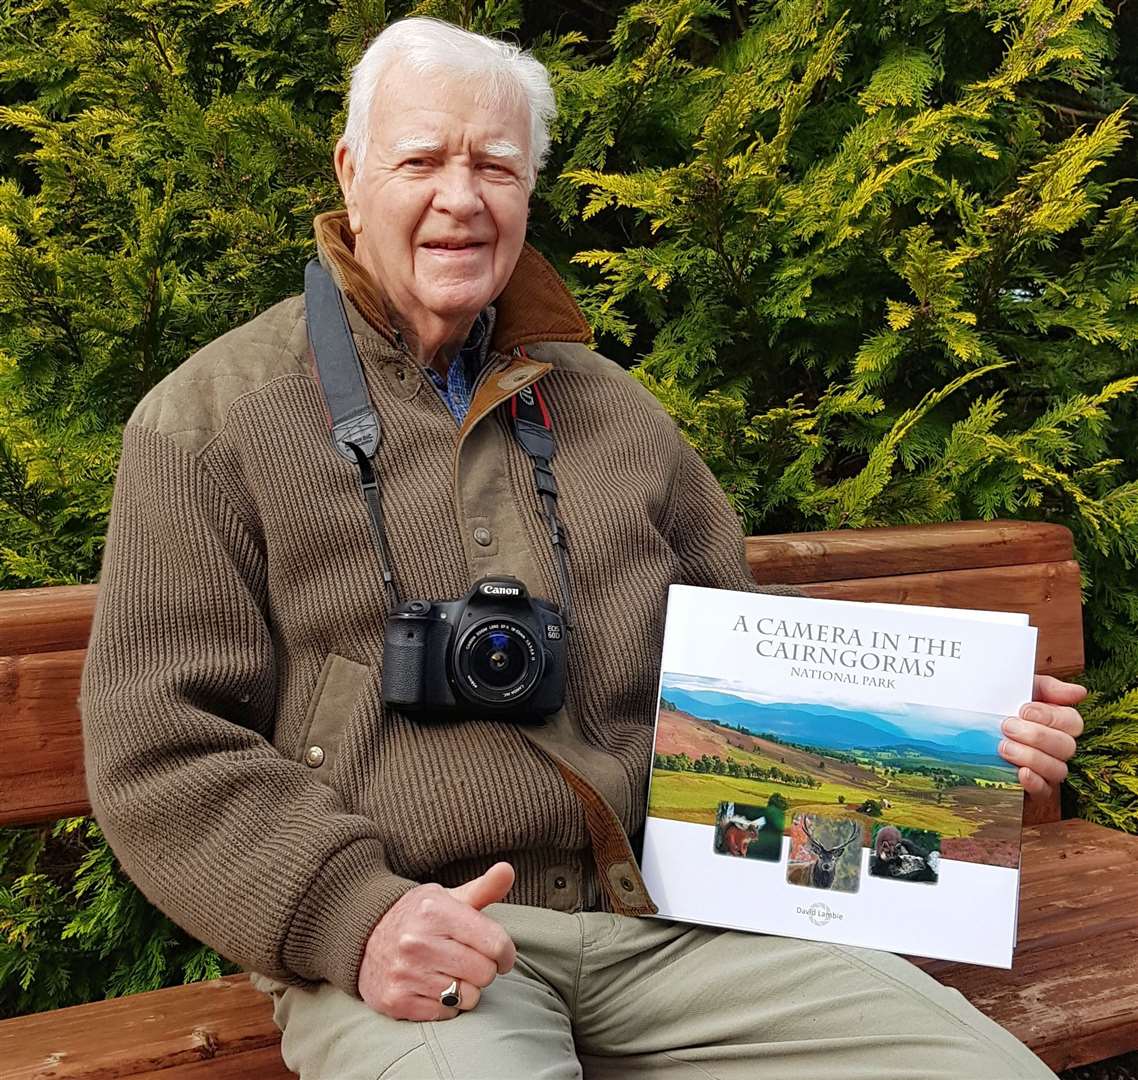 David had a love of photography and produced a superb book called 'A camera in the Cairngorms National Park'.